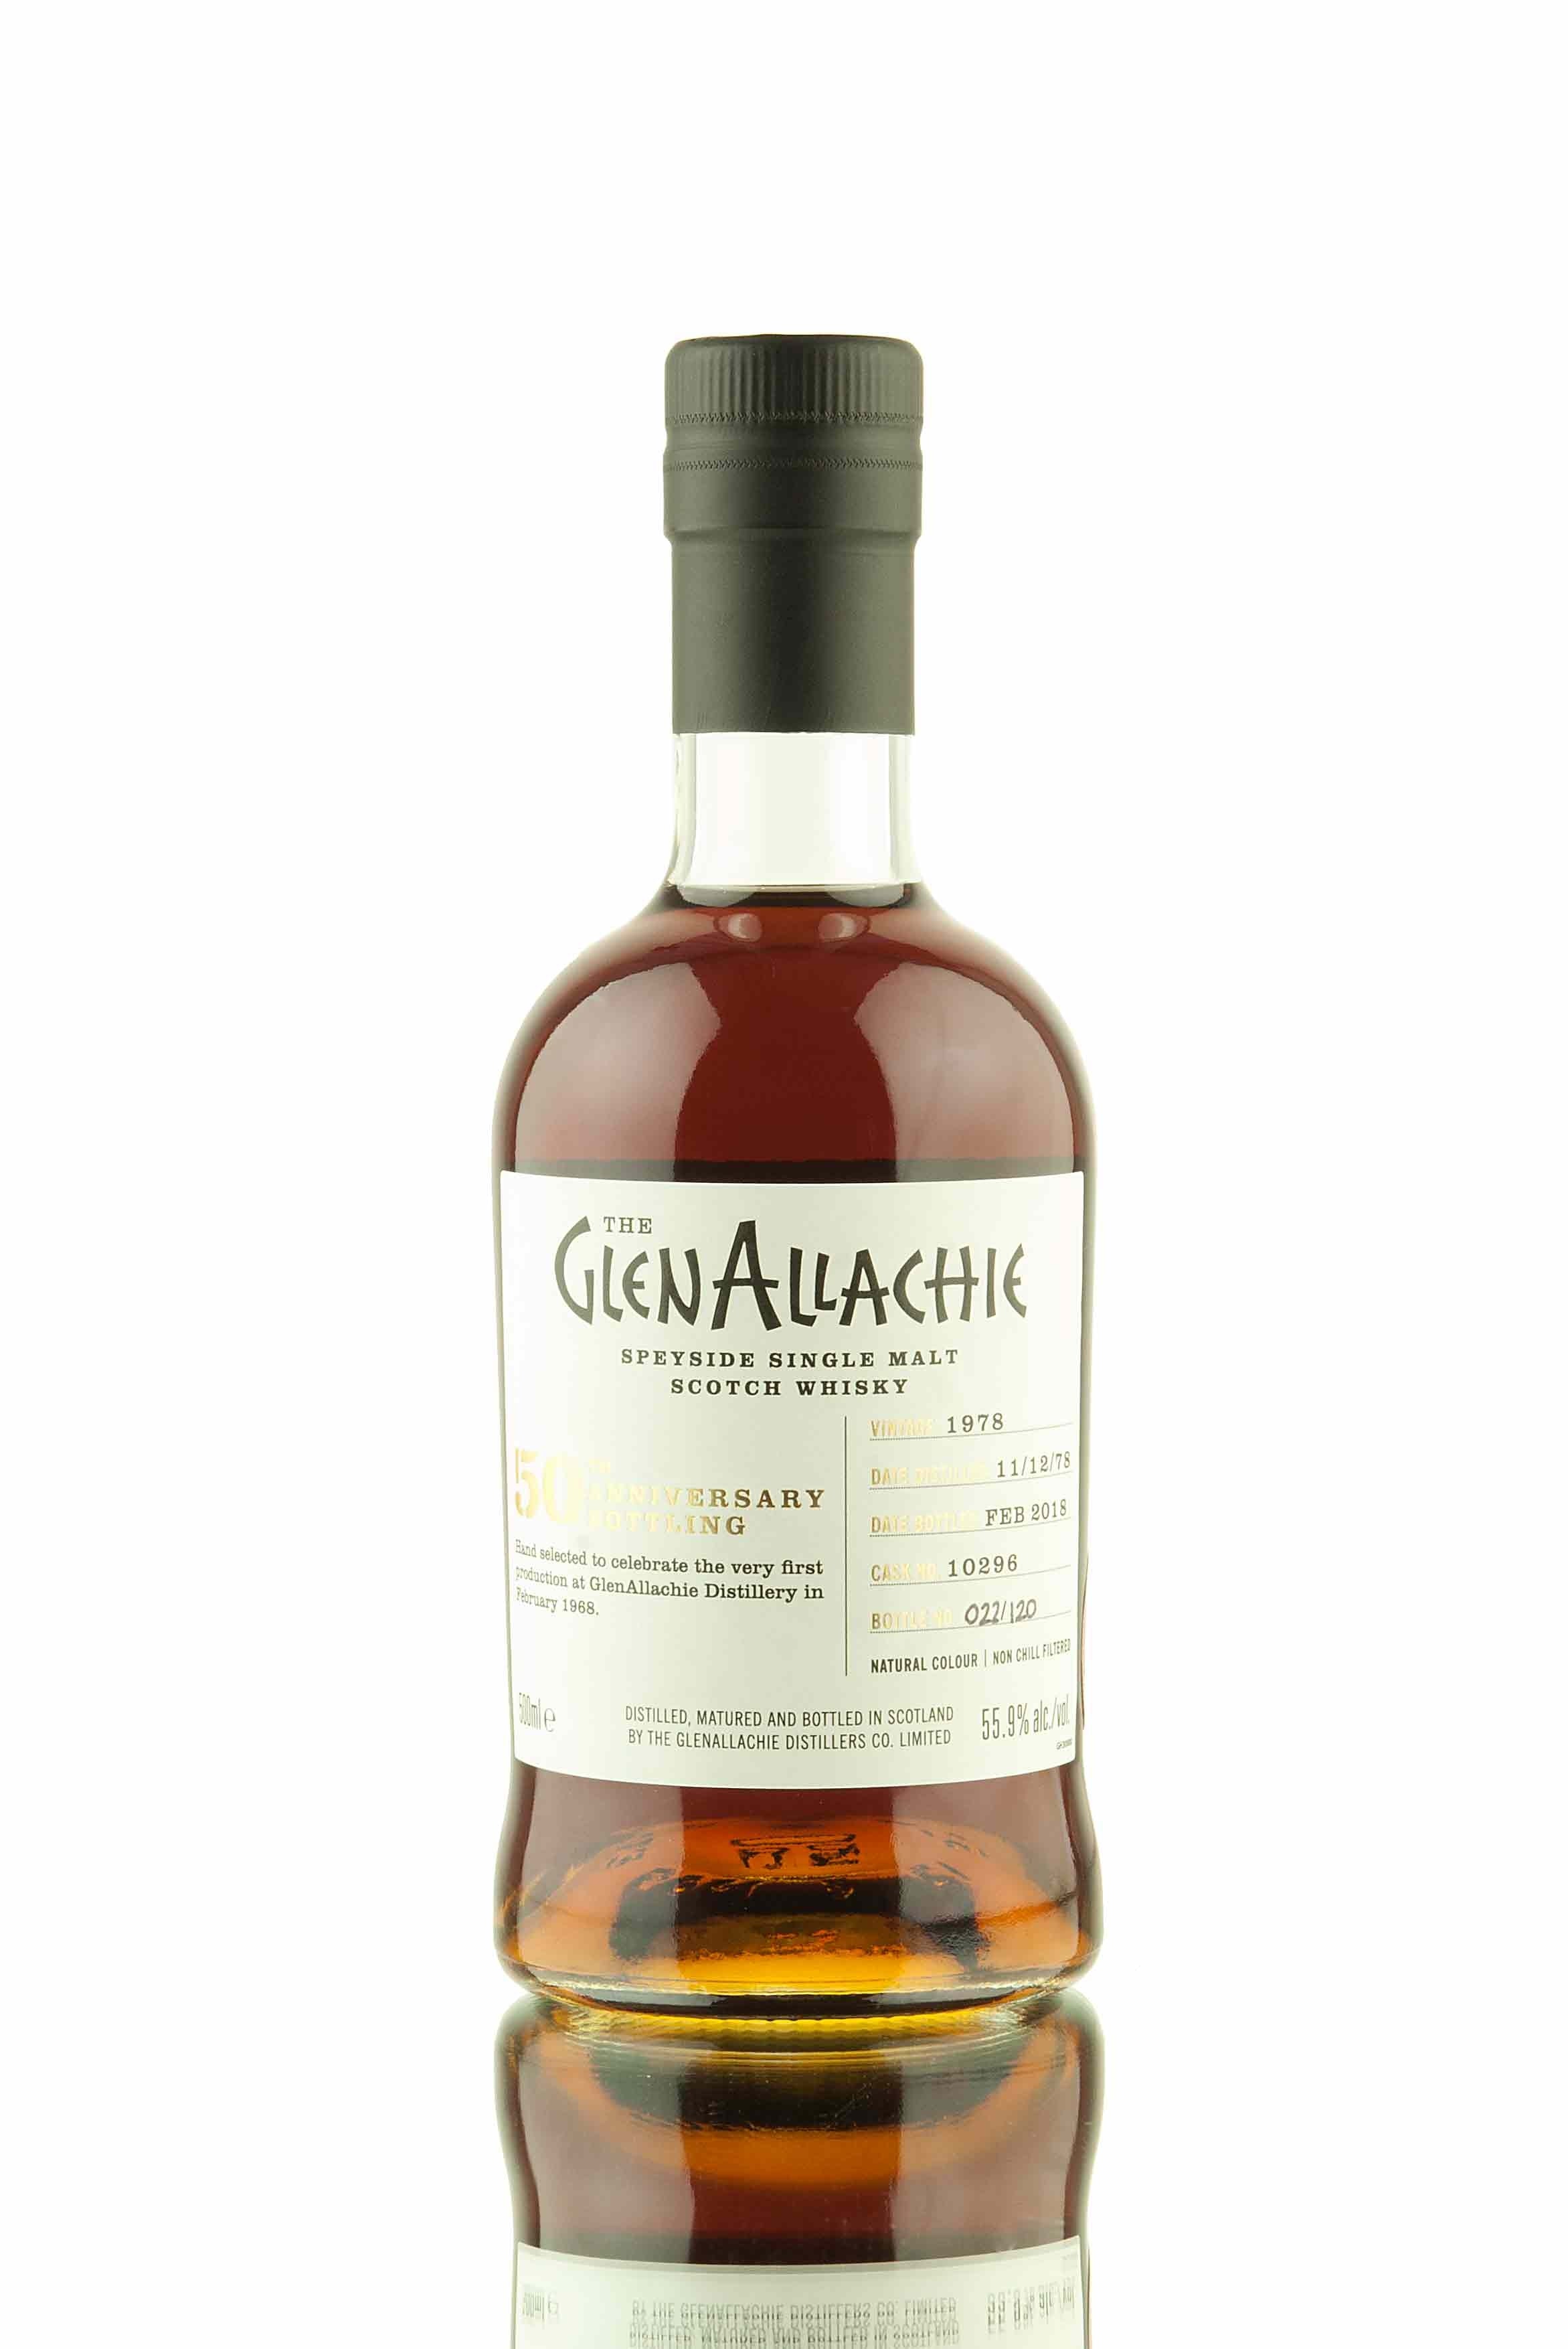 GlenAllachie 39 Year Old - 1978 | Cask 010296